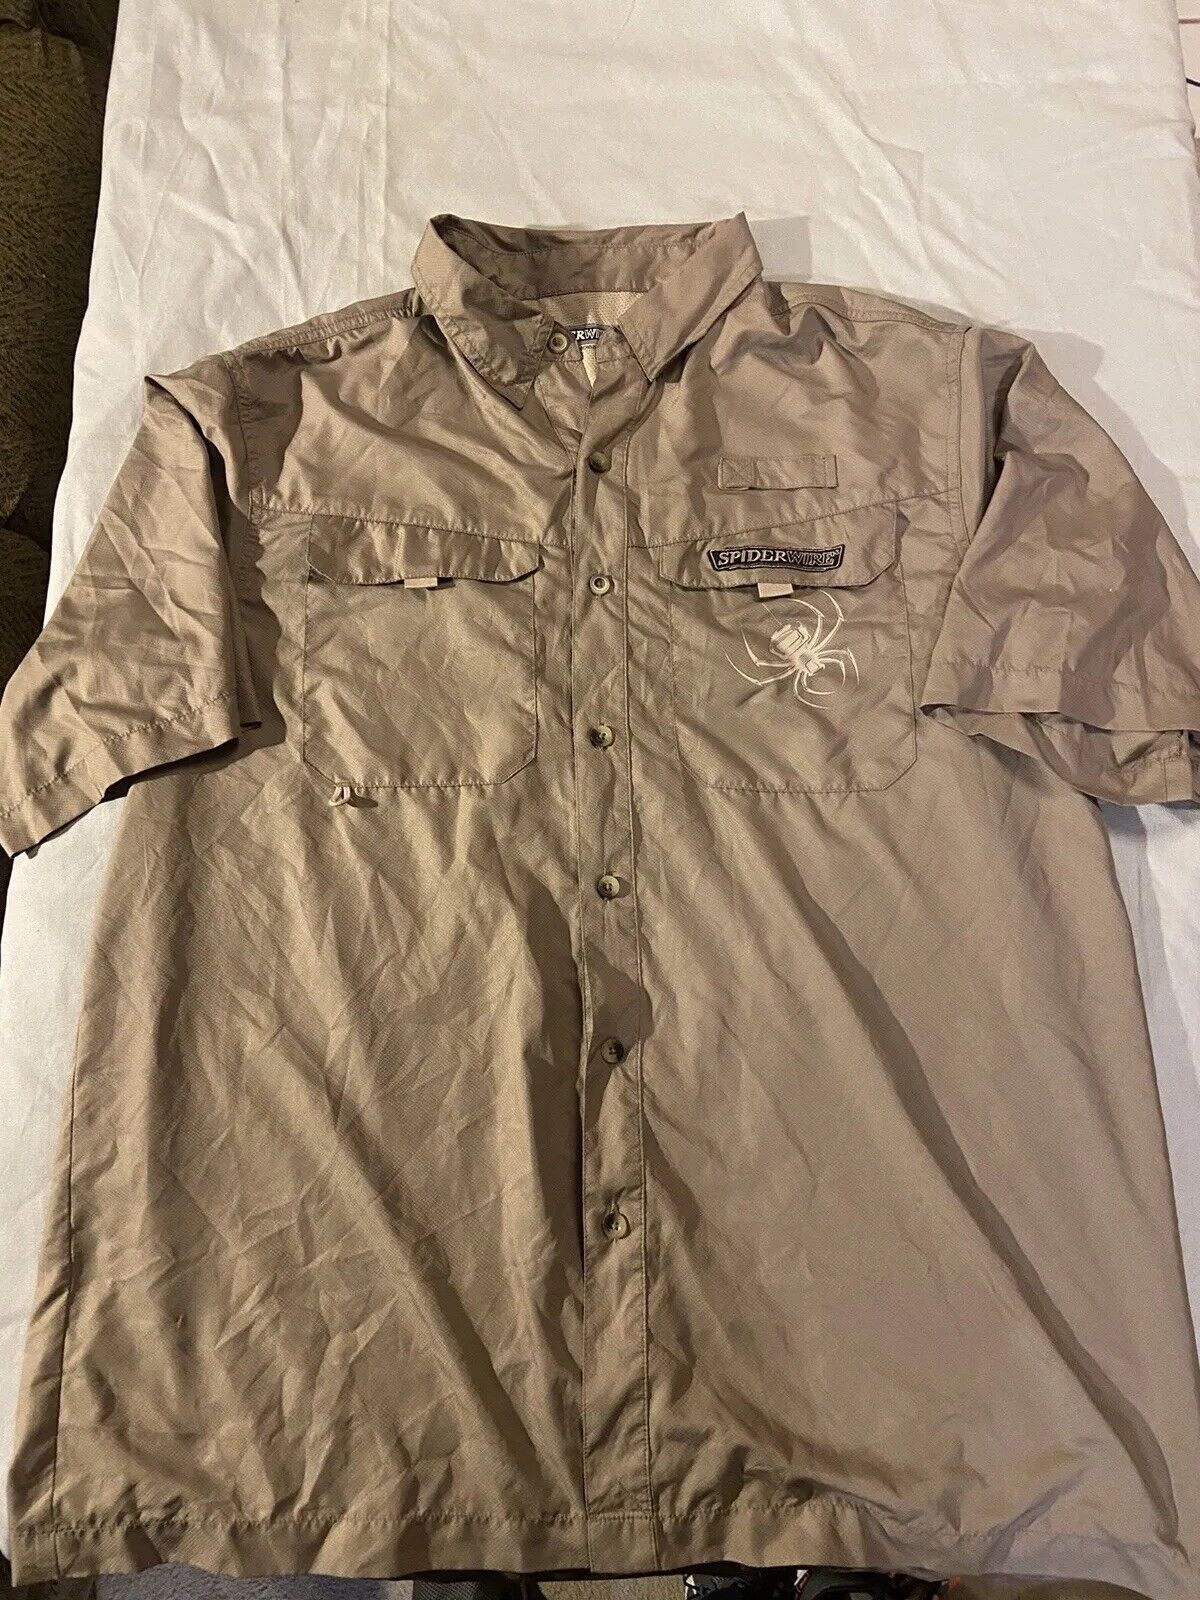 Spider Wire Short Sleeve Fishing Shirt Men’s Size Large